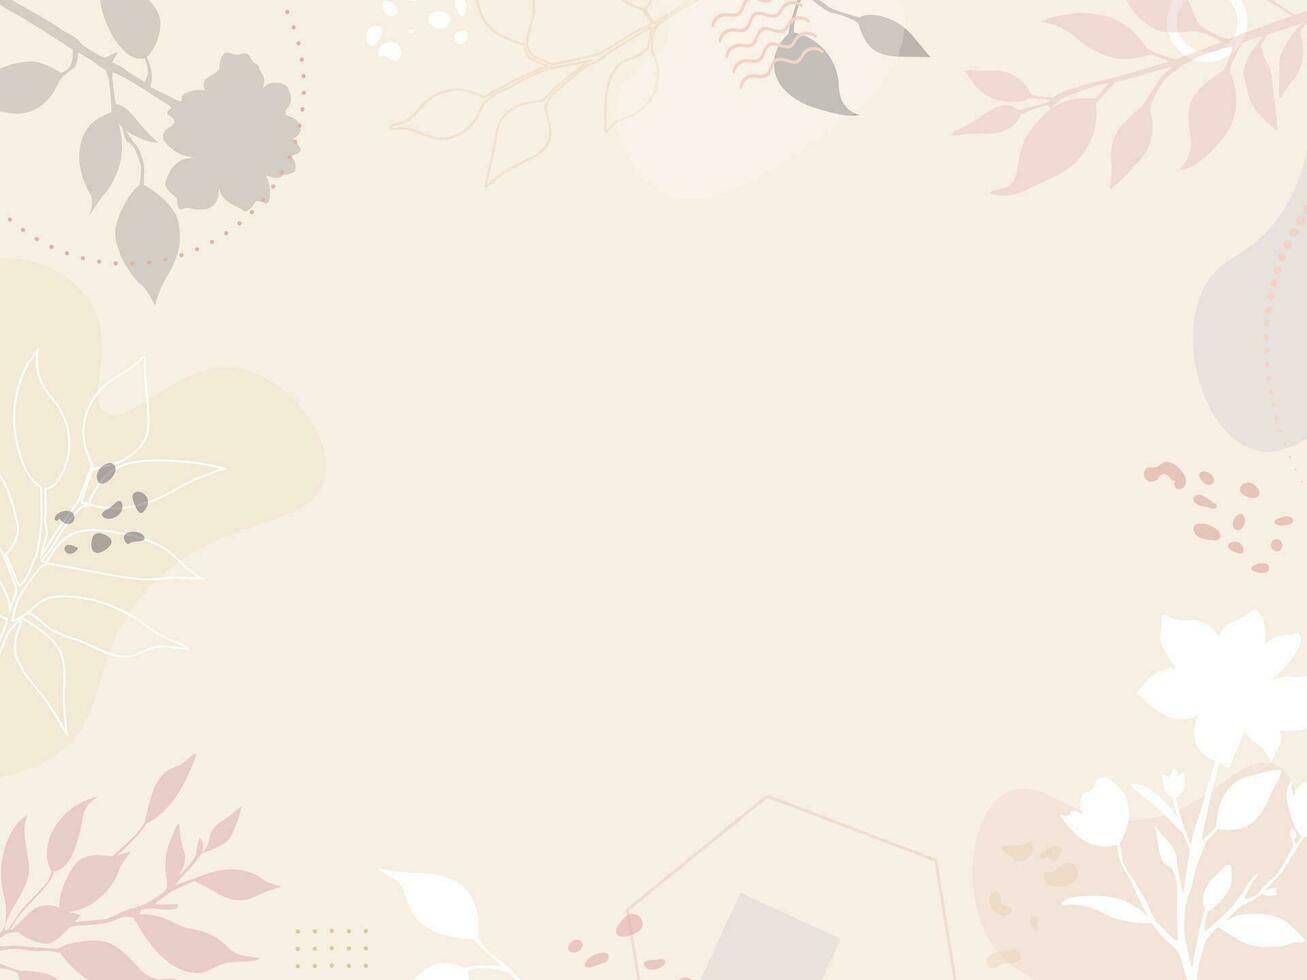 abstract template with plants and flowers, bauhaus, floral background with geometric shapes vector